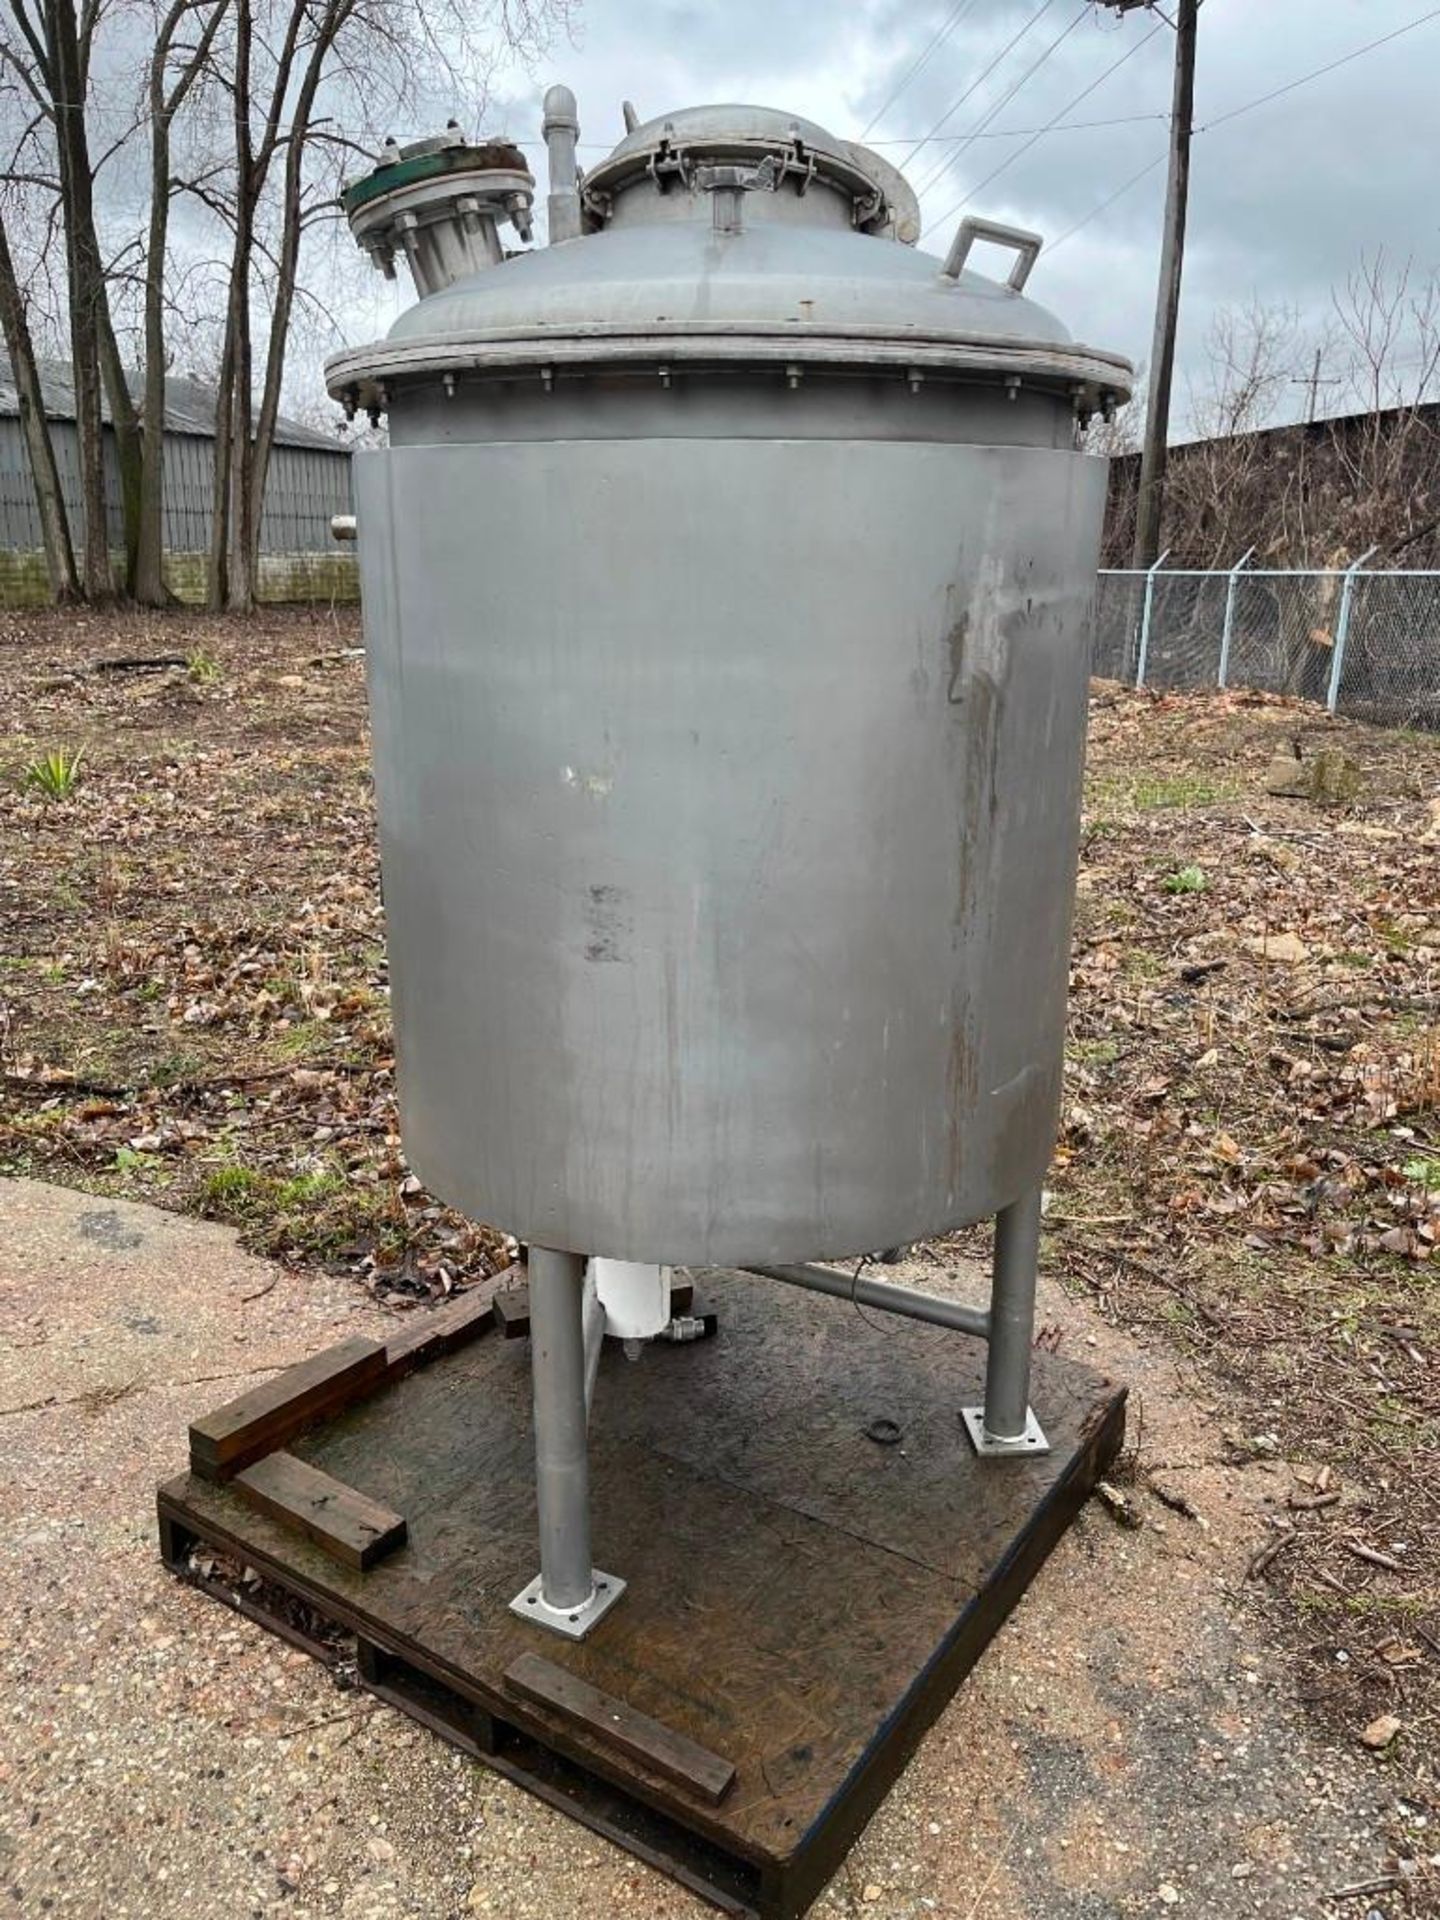 Caldera's Leon Stainless Steel Jacketed Tank, Model TQH-500, S/N: 1435-7012. Rated for up to 135 gal - Image 2 of 8